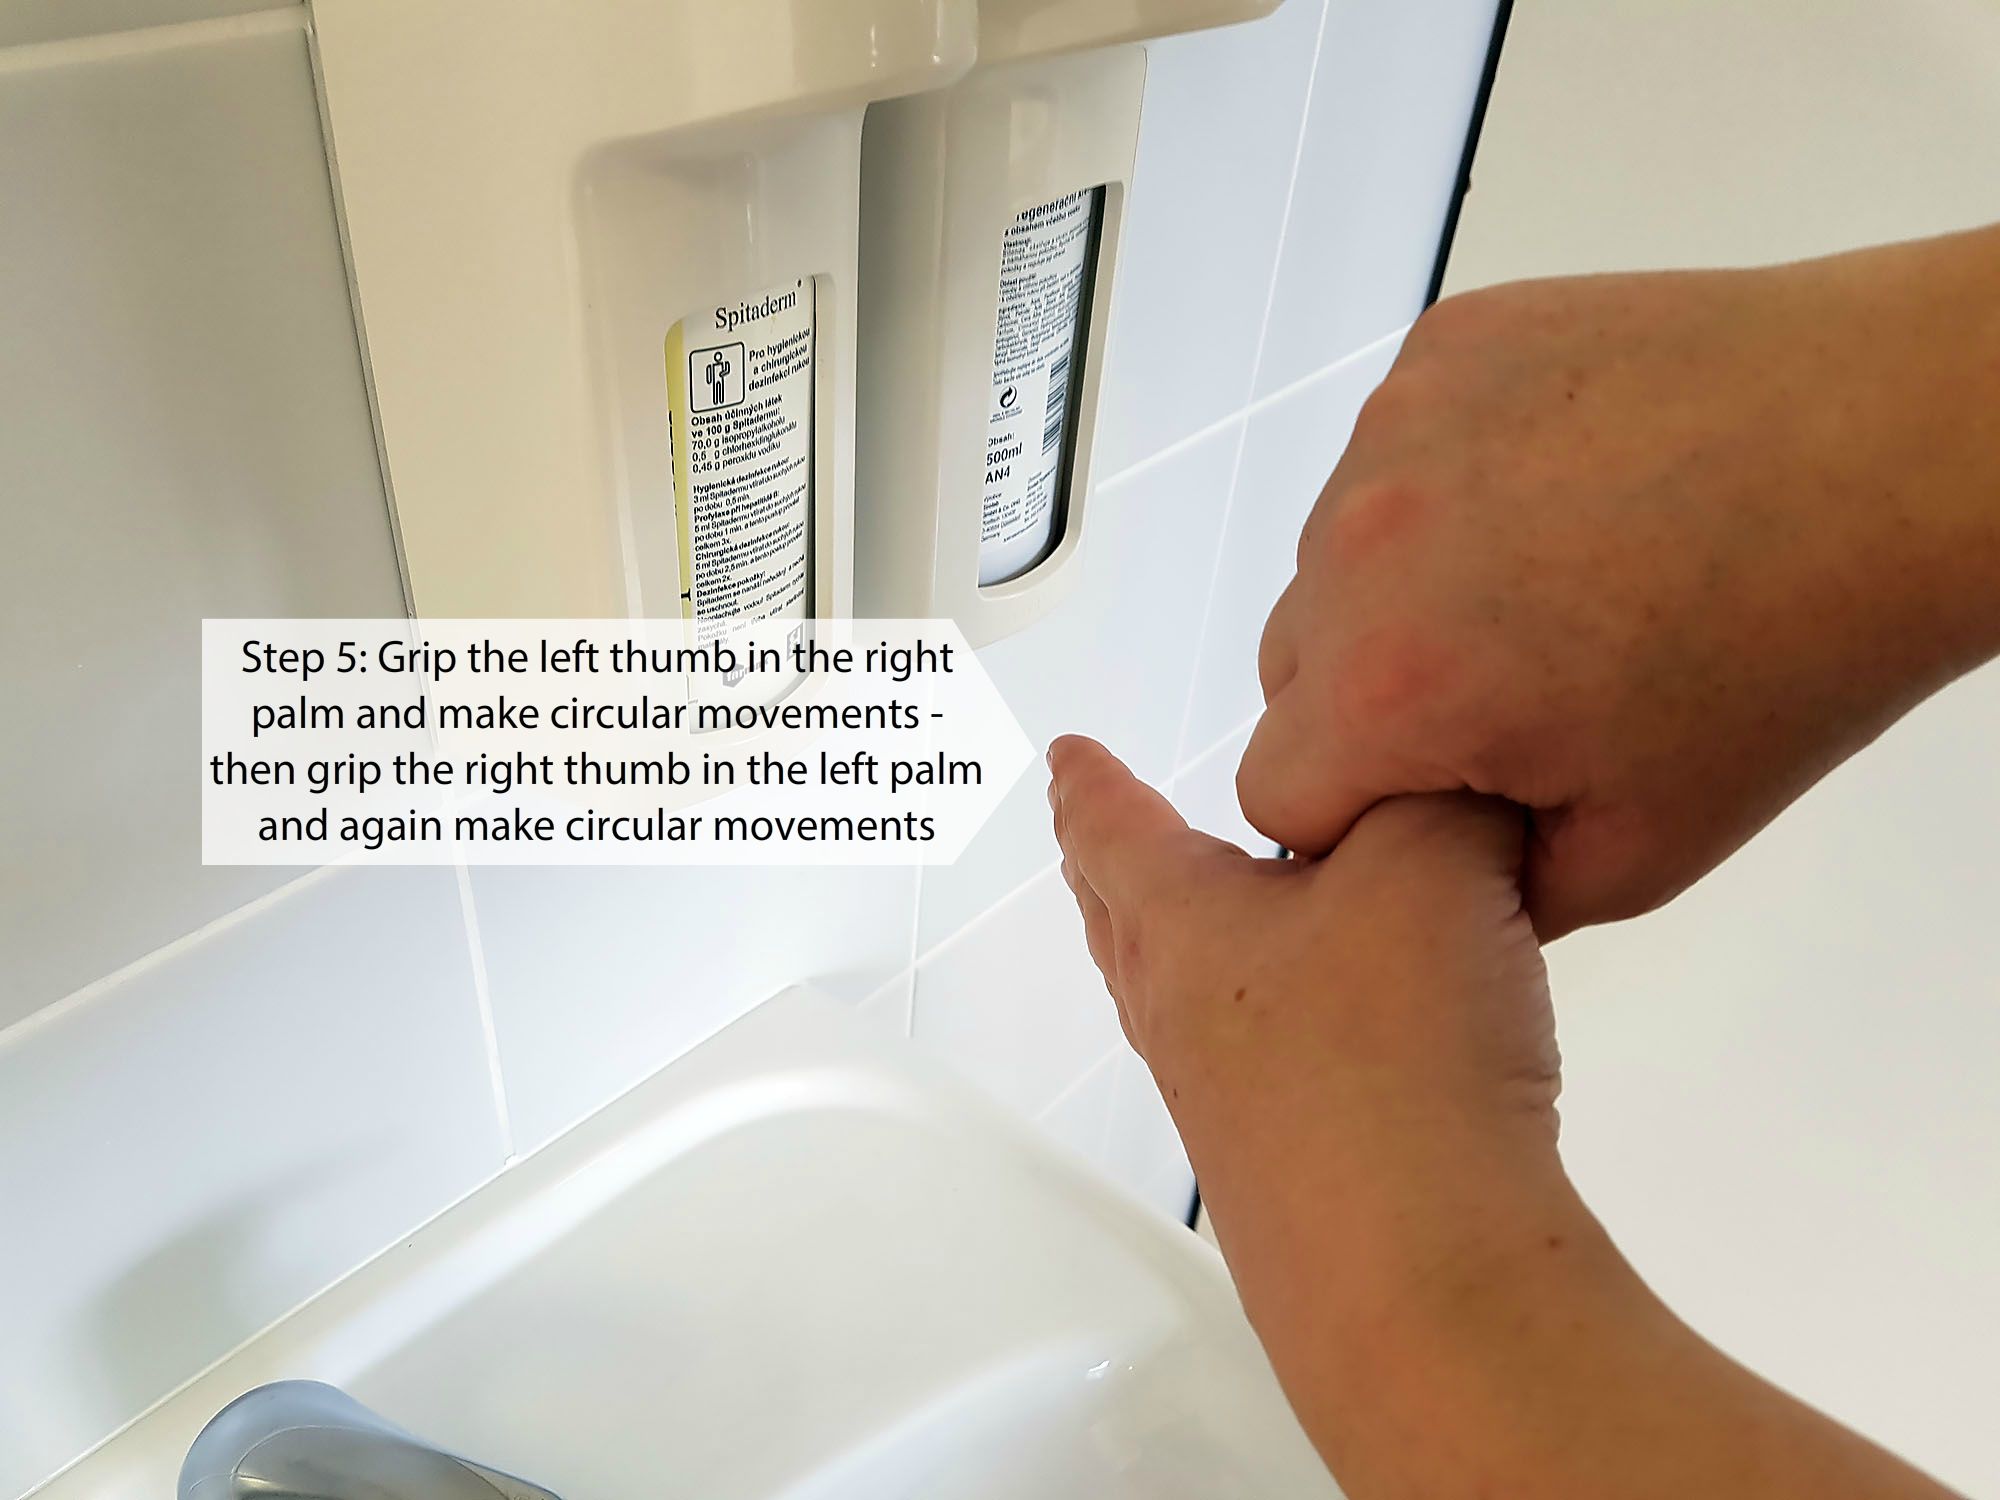 Procedure for rubbing the disinfectant solution during hygienic hand disinfection (Step 5)